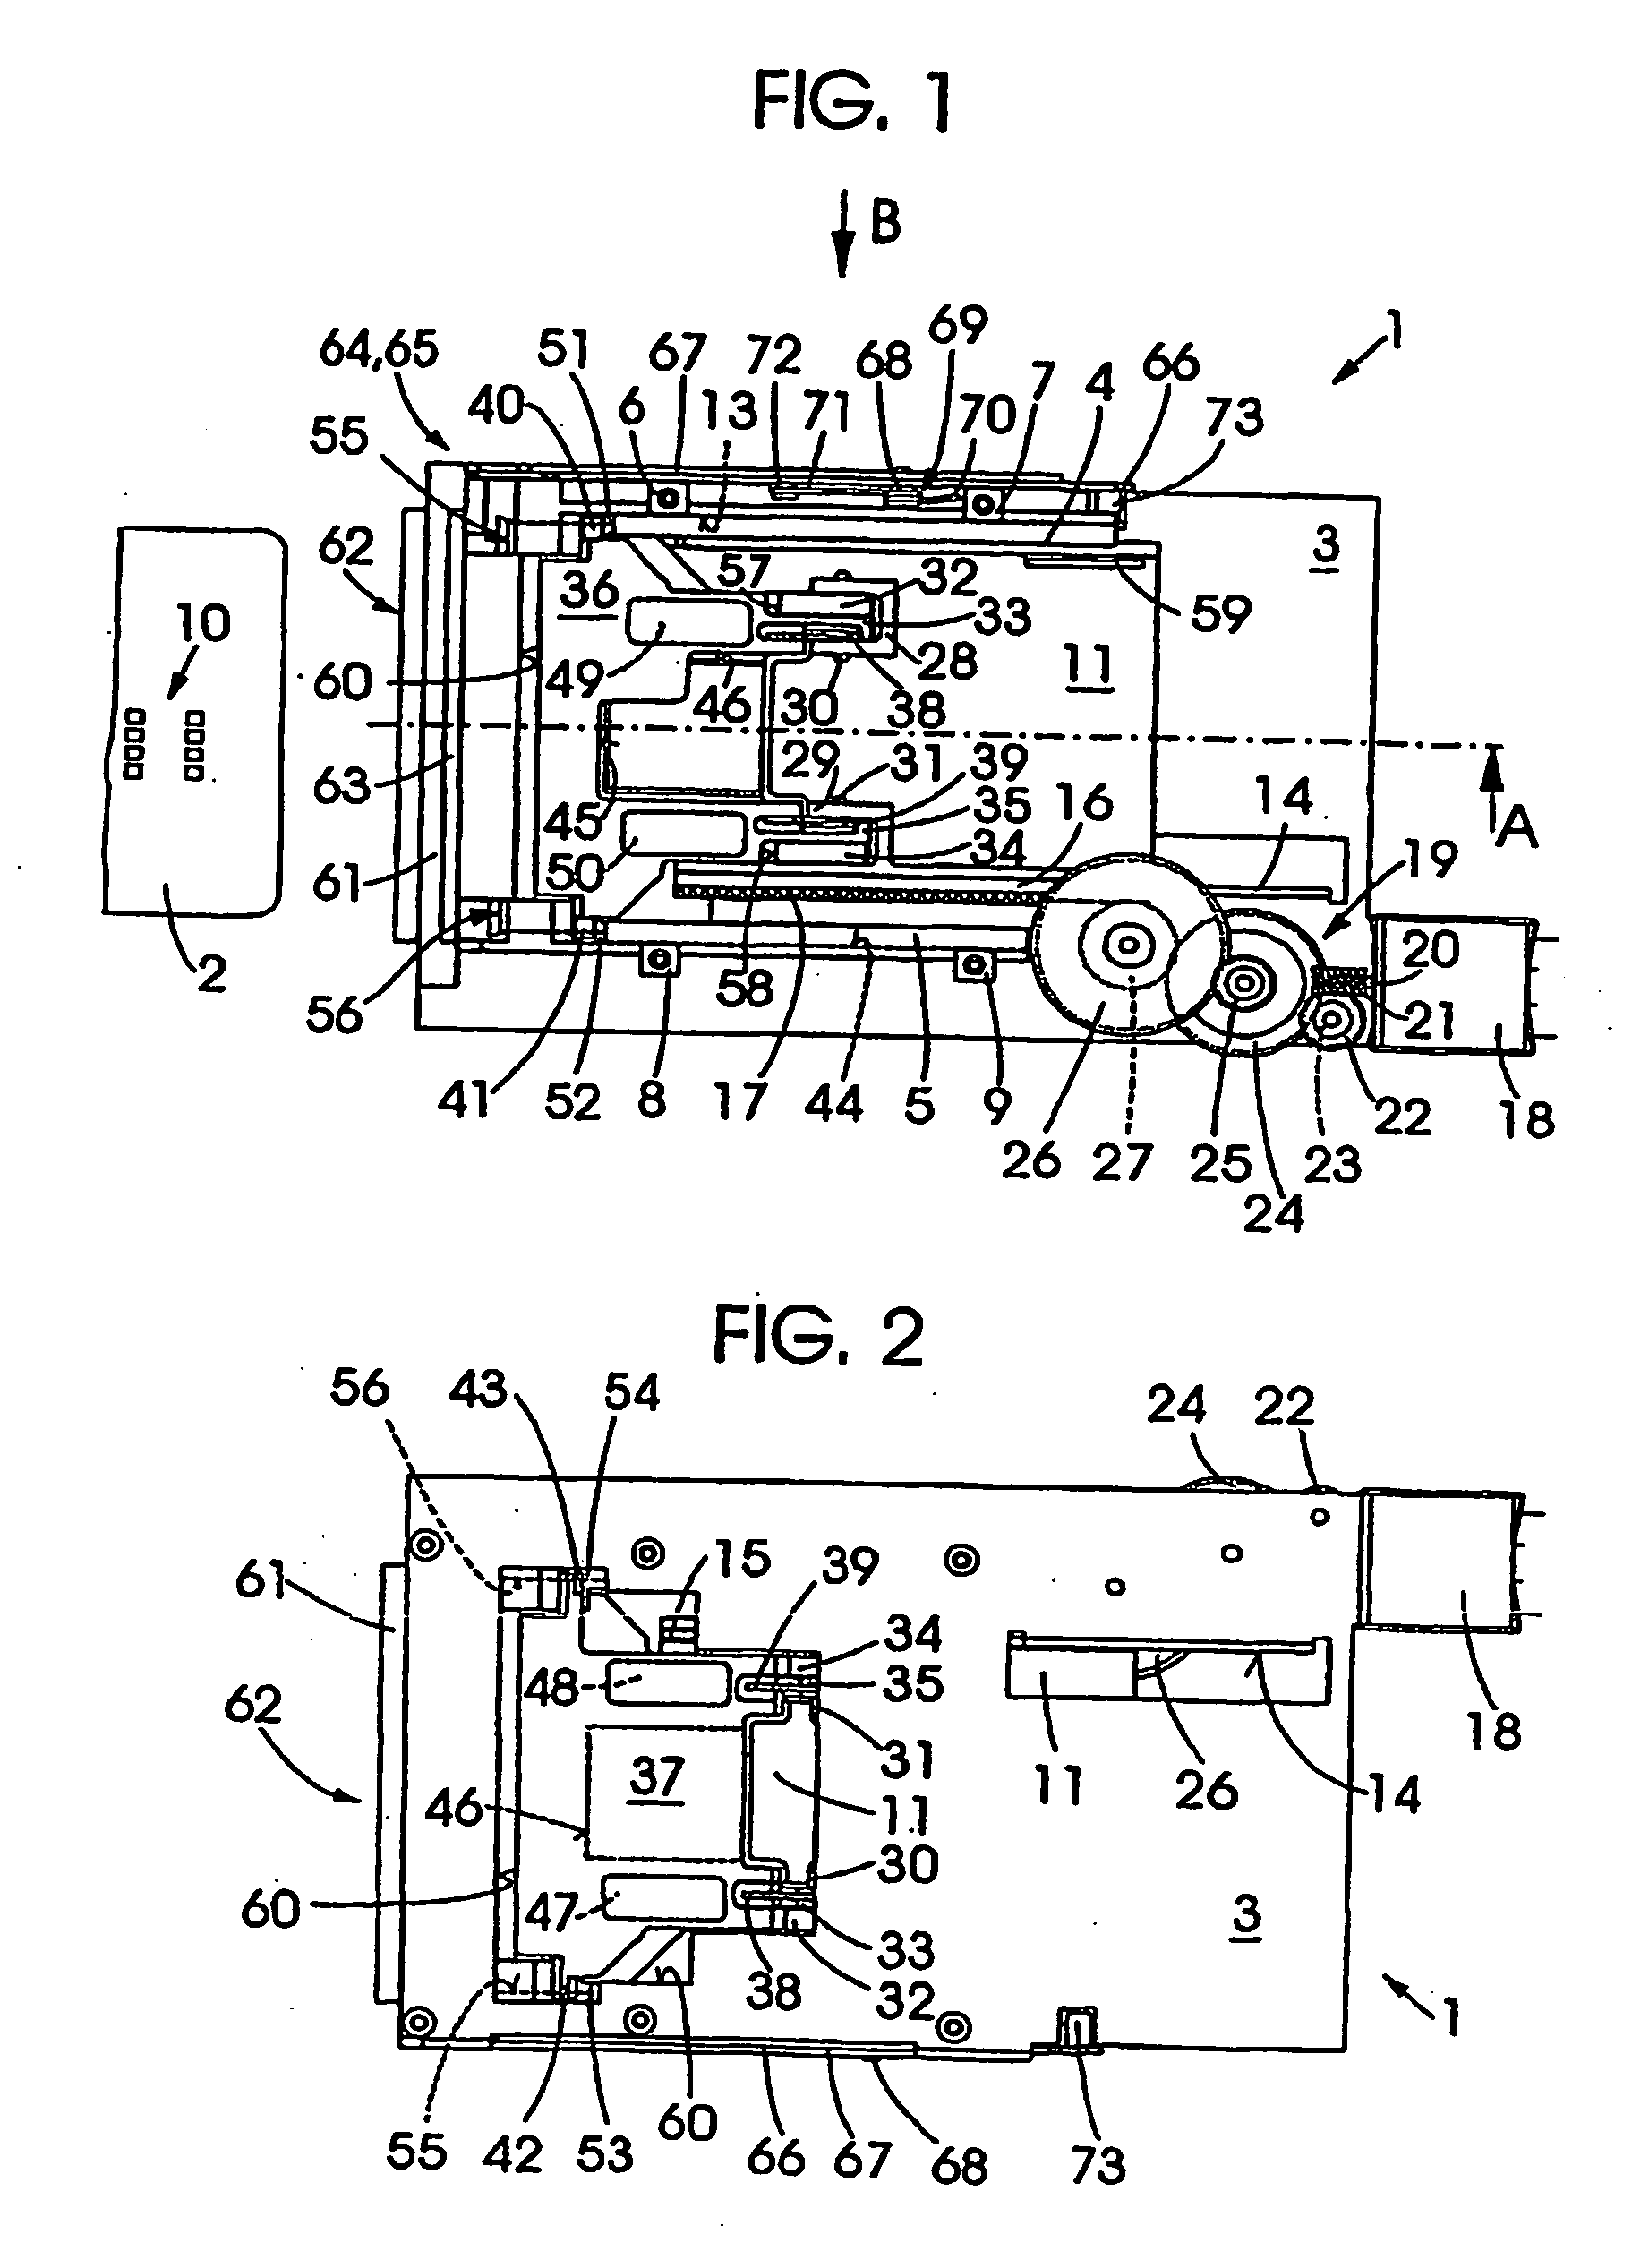 Chip card receiving device comprising a carriage for holding a chip card